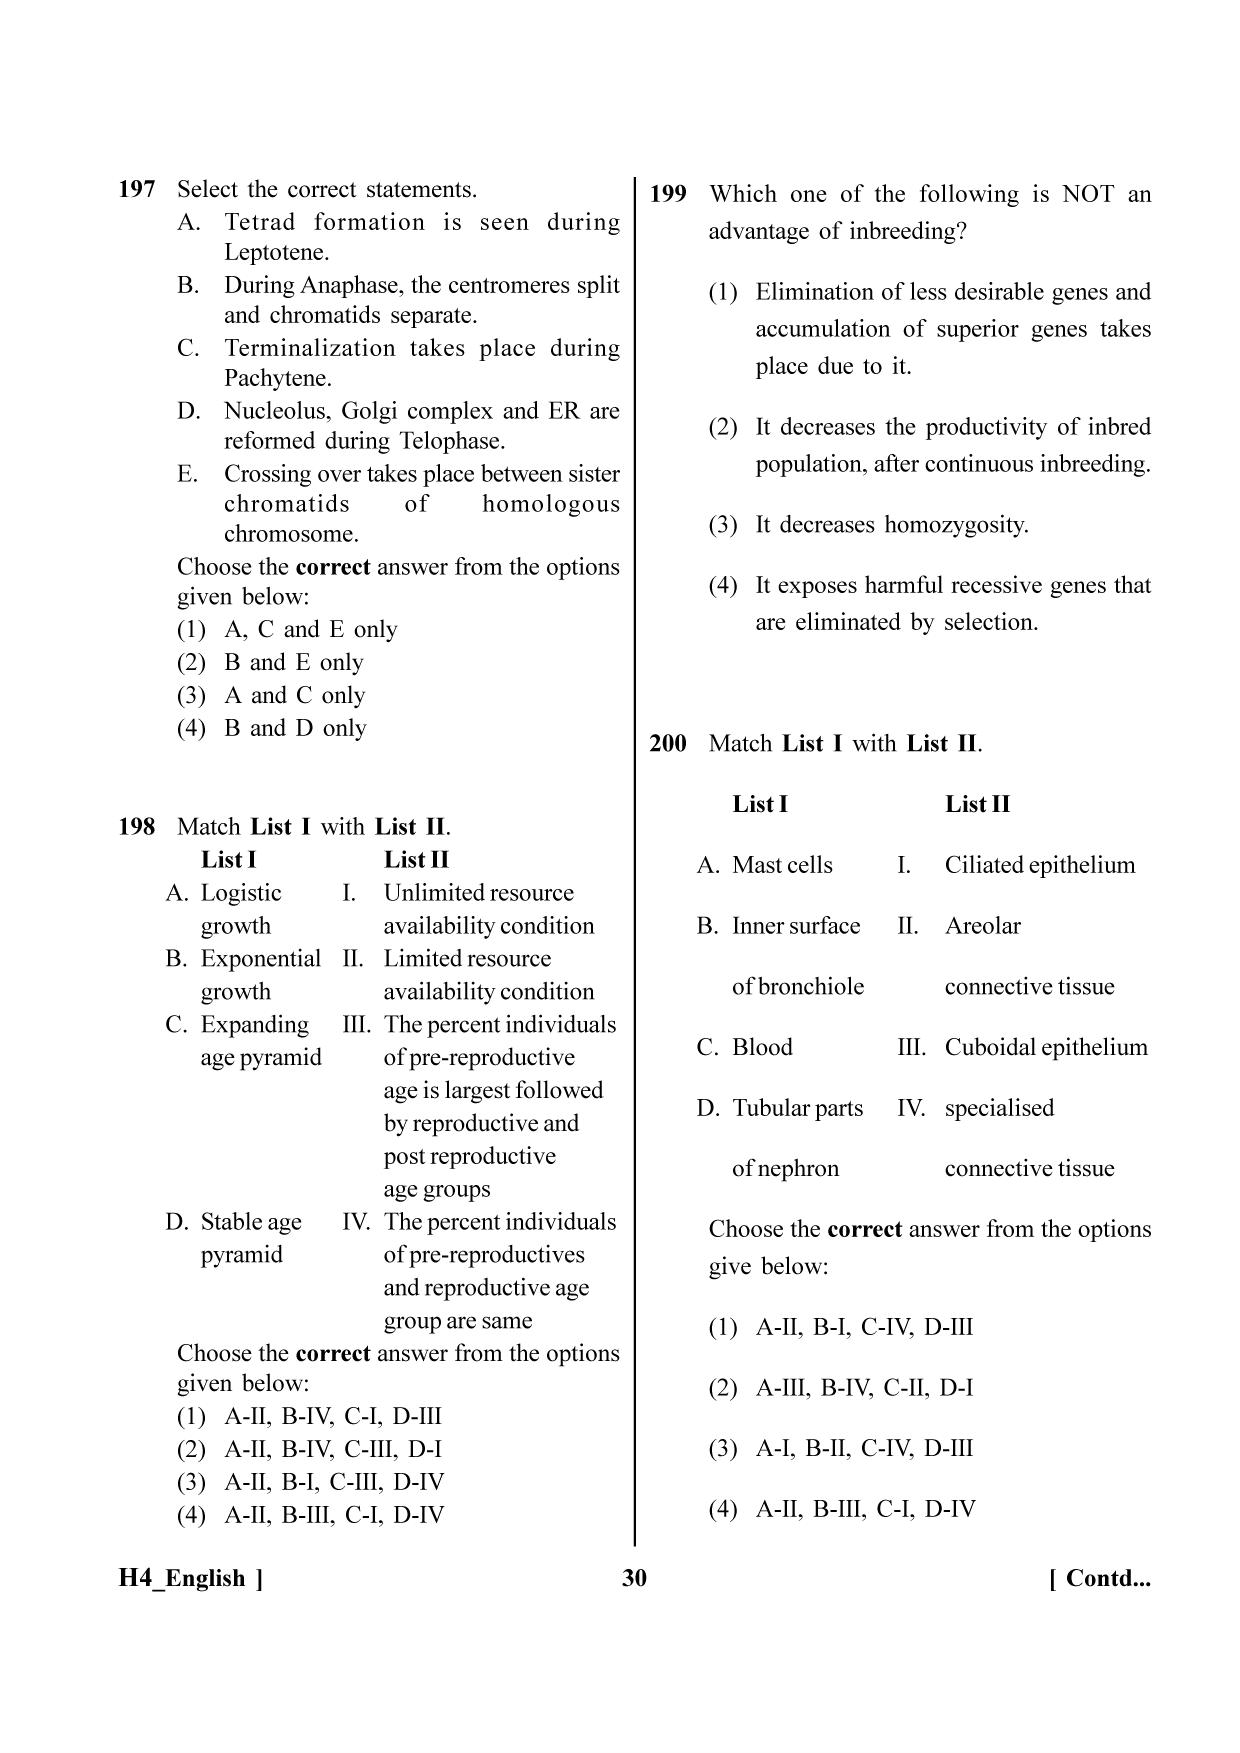 NEET 2023 H4 Question Paper - Page 30